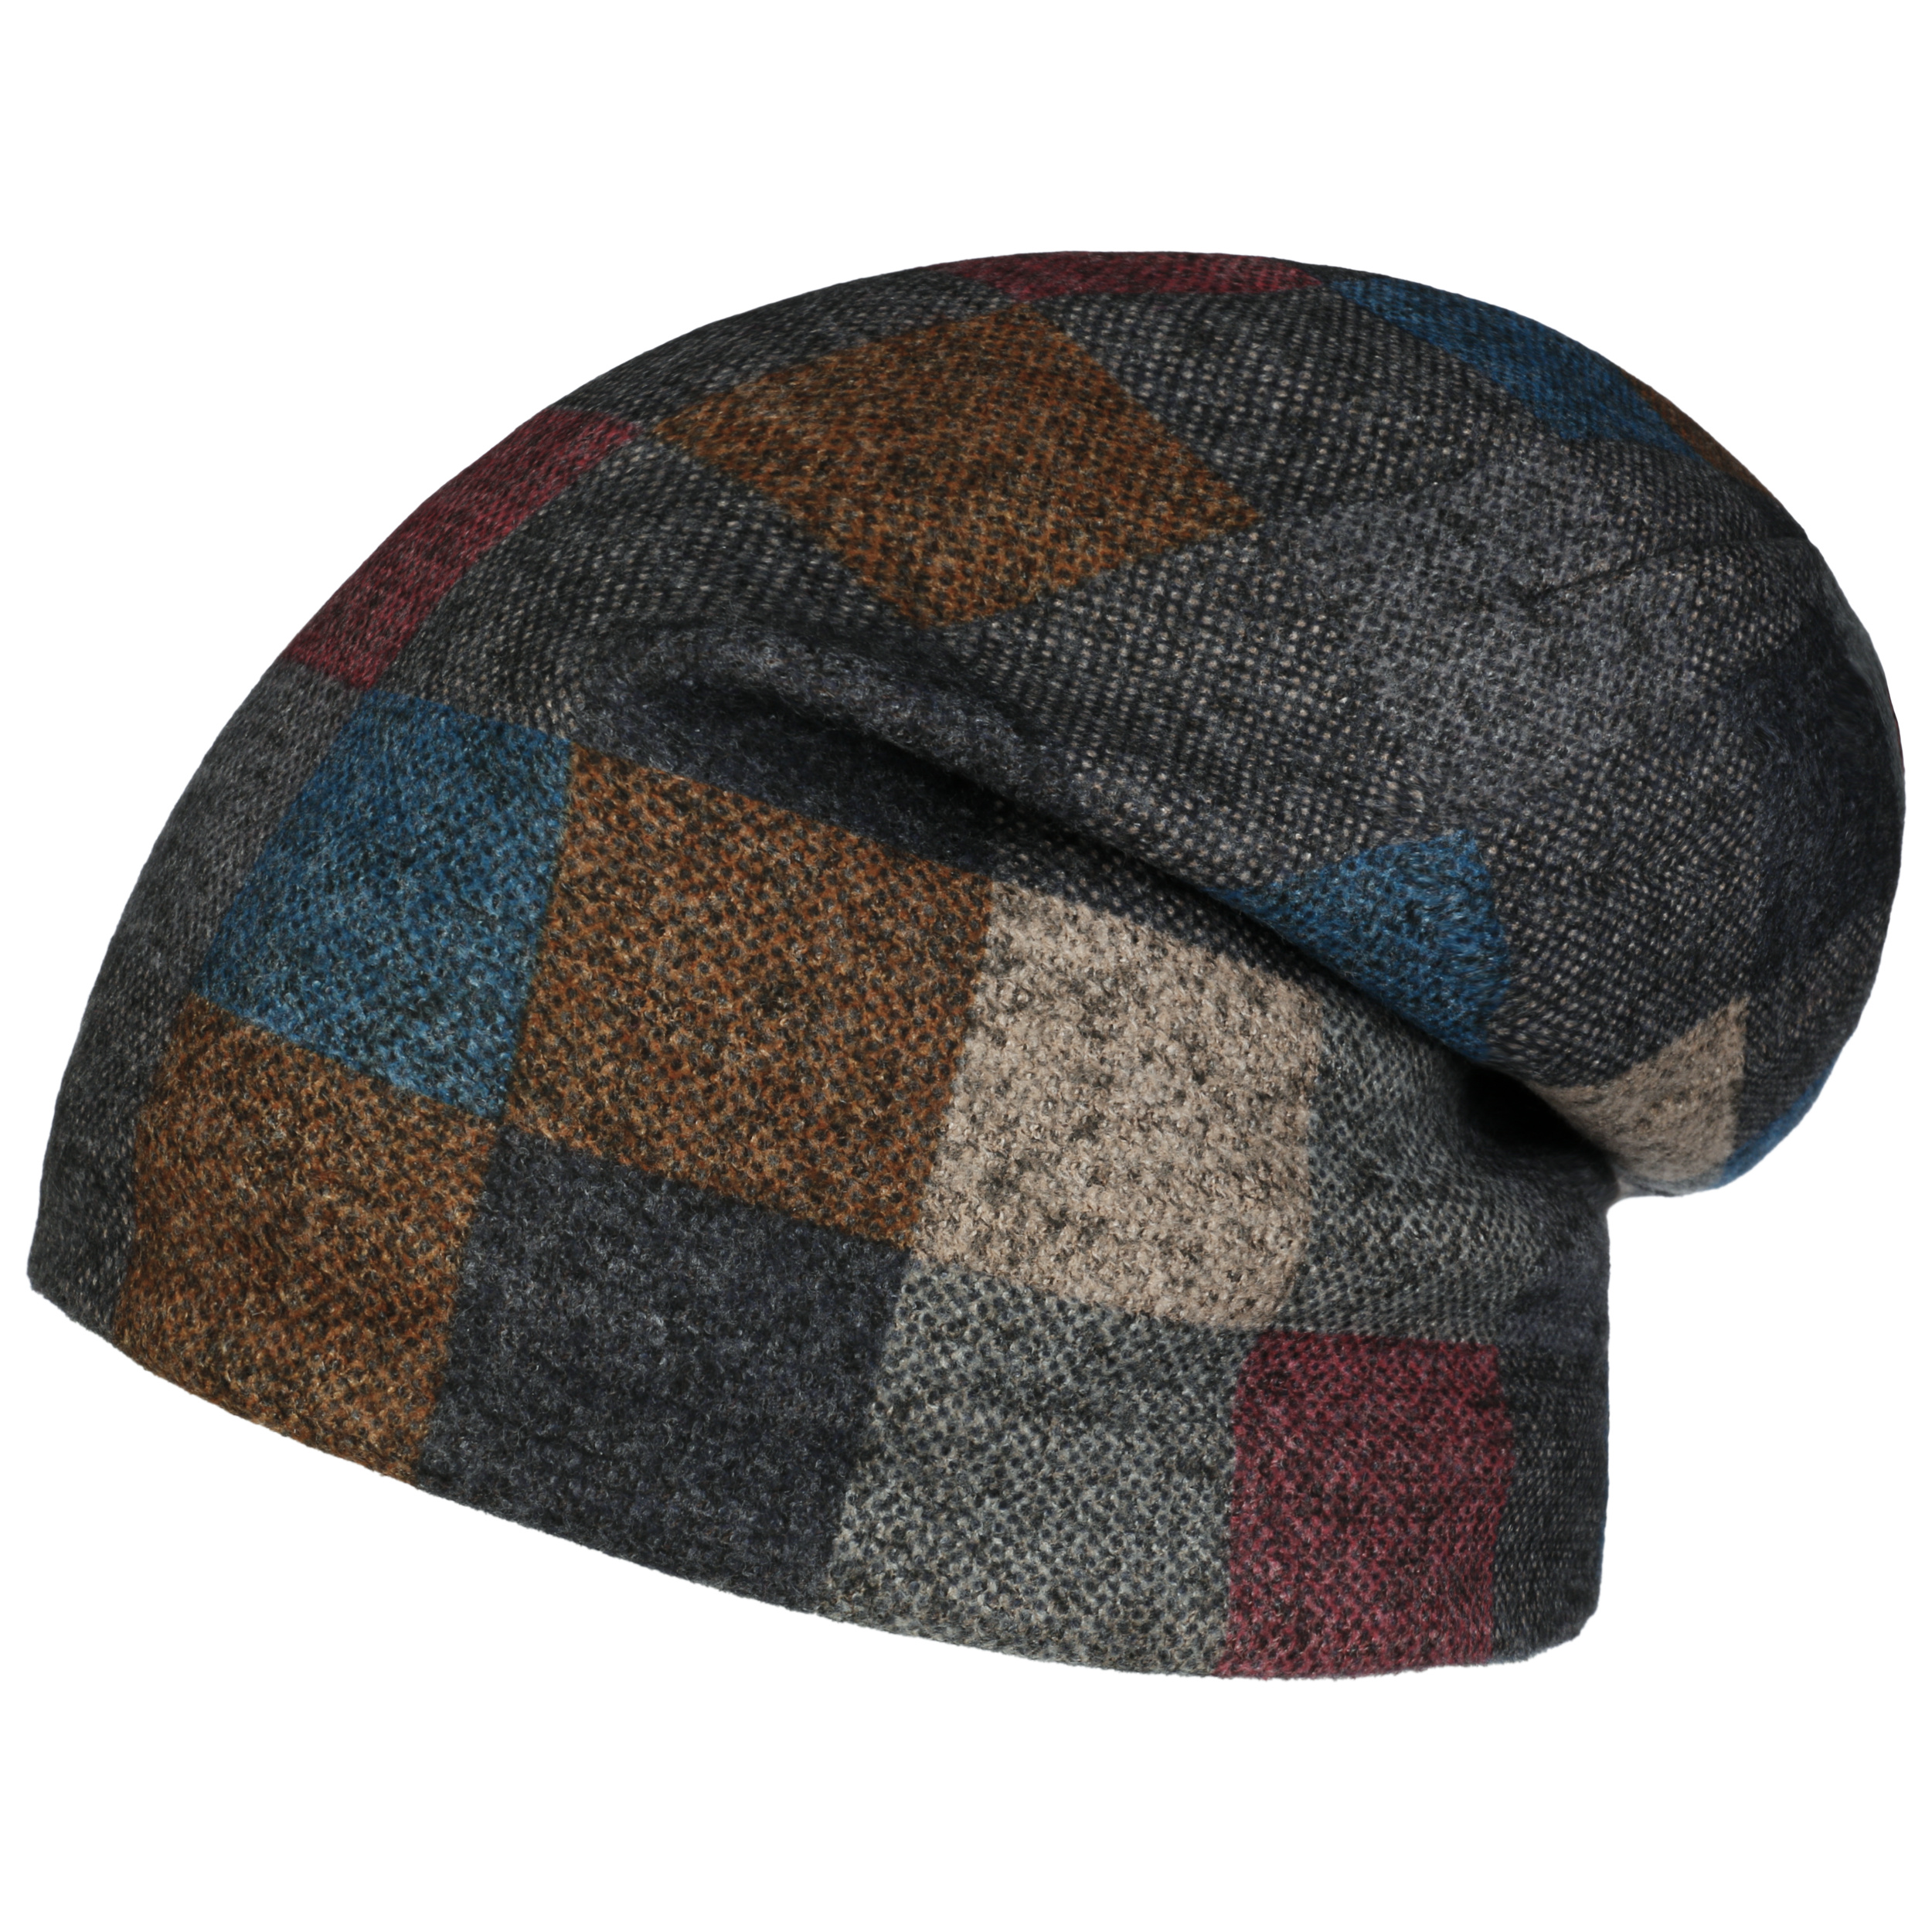 Feat criticus Wolkenkrabber Patchwork Check Beanie Muts by Lipodo - 19,95 €